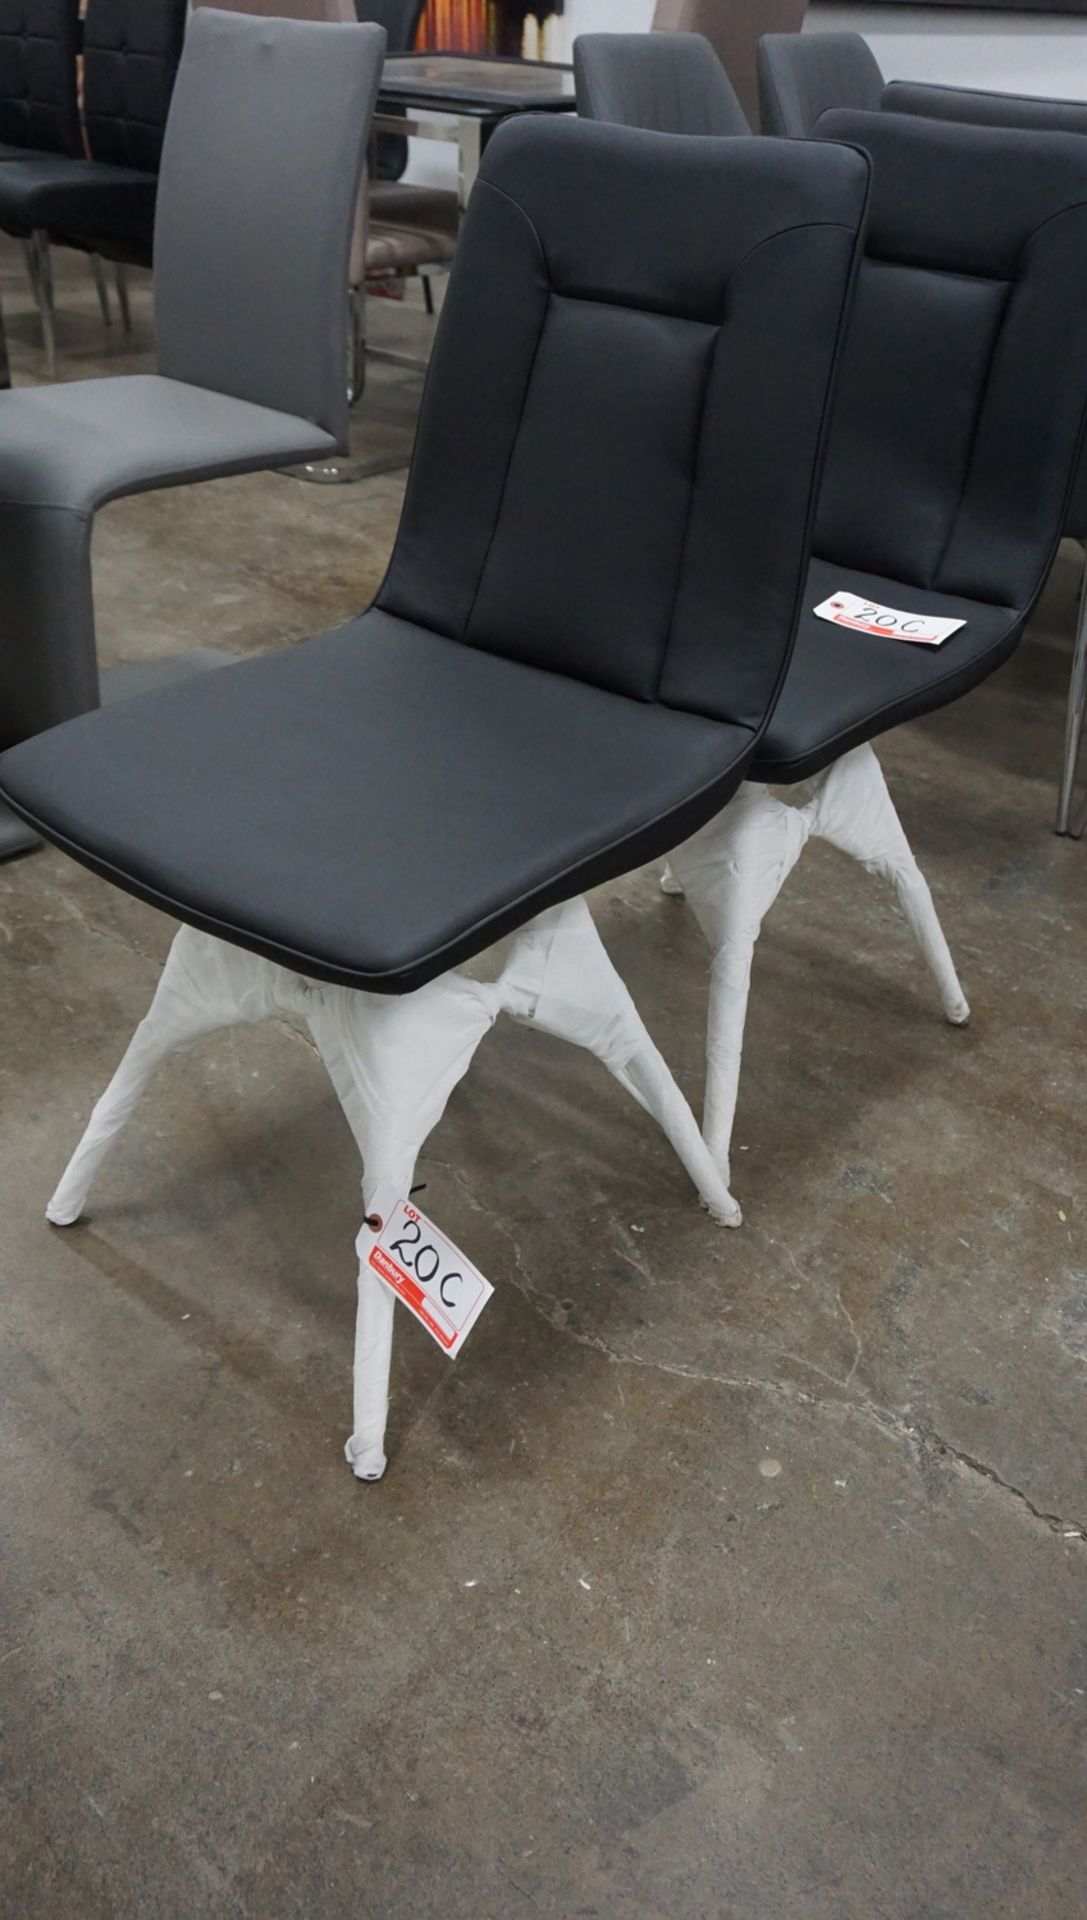 UNITS - BLACK PU LEATHER DINING CHAIRS W/ CHROME LEGS